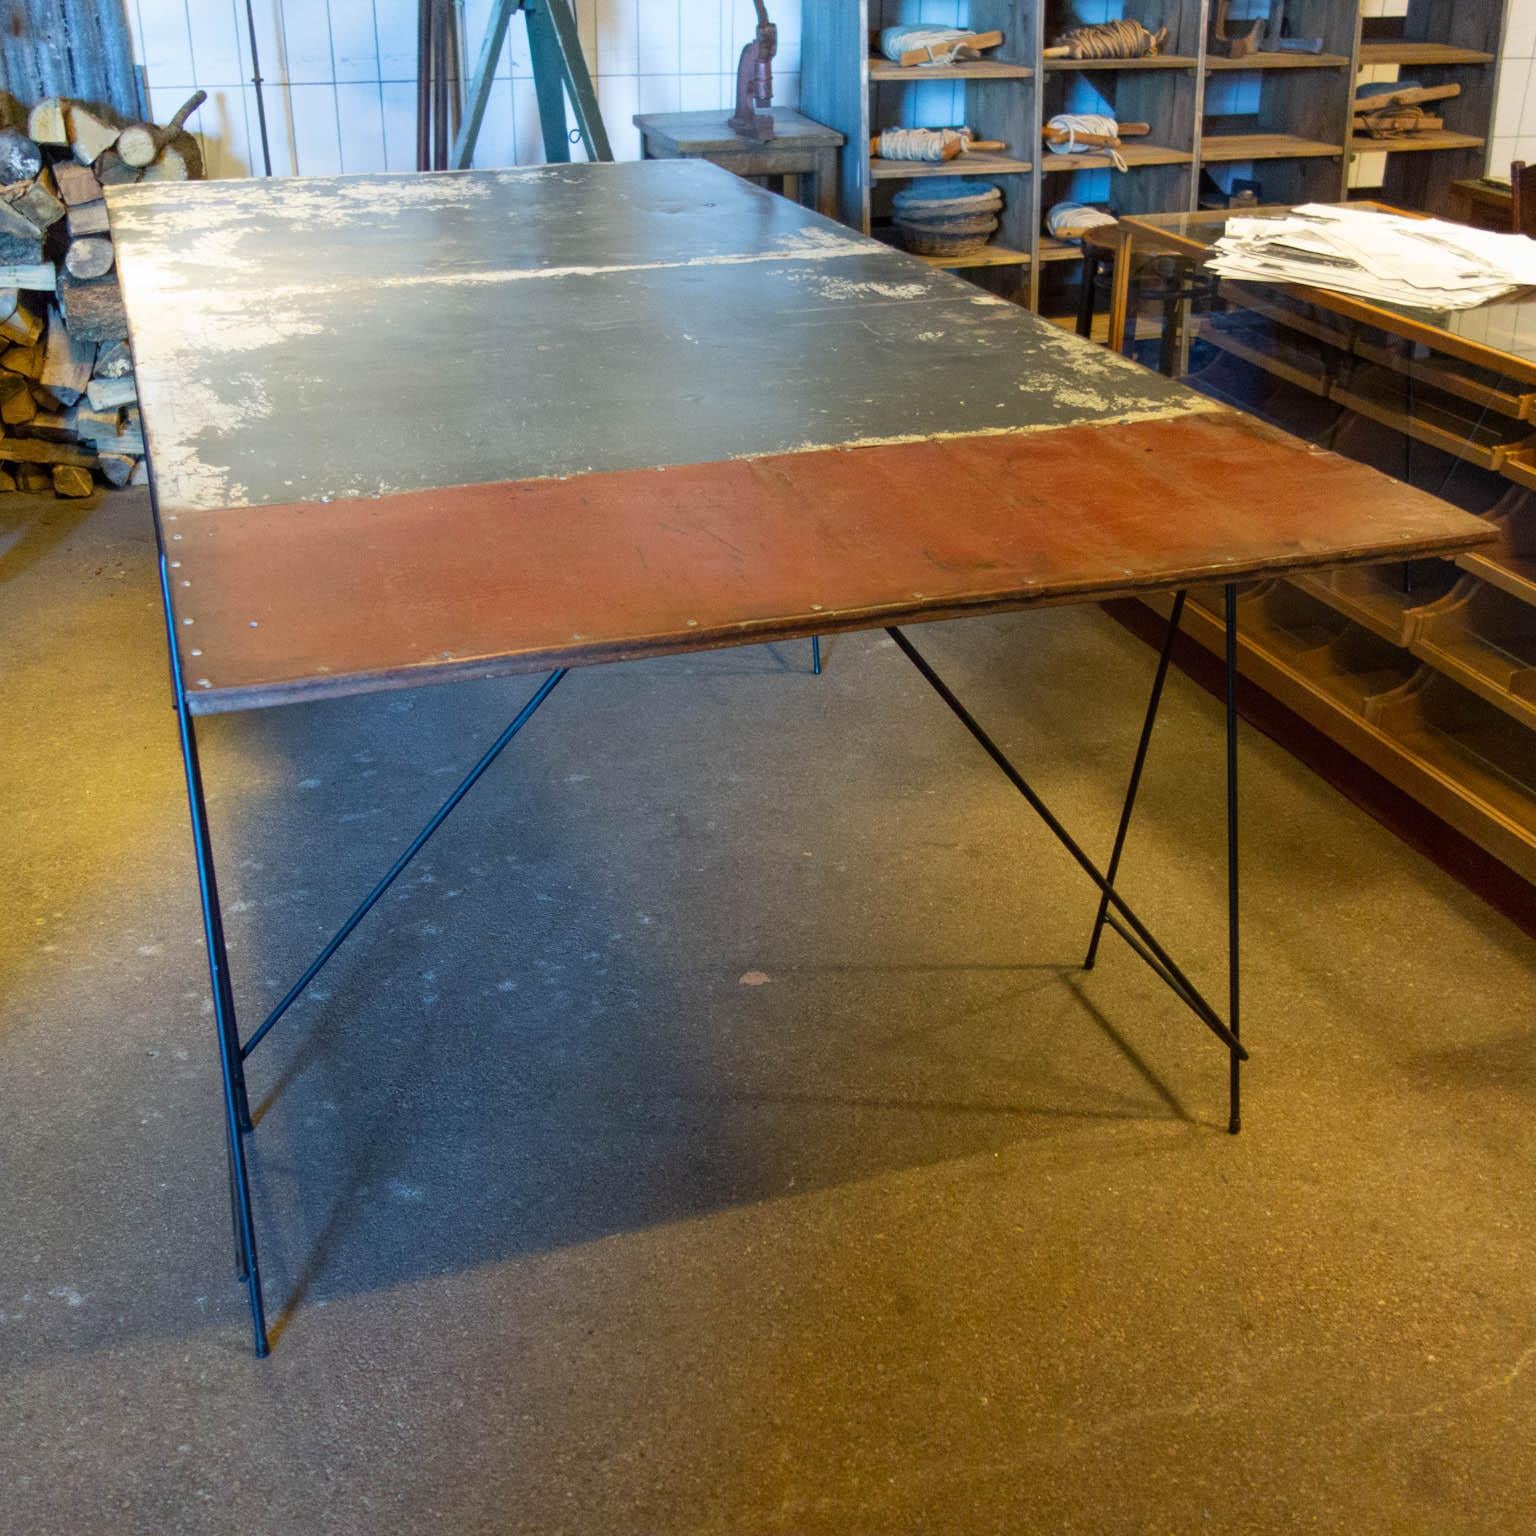 This table is a special upcycle work by artist Frits Jeuris. The artist is known for his unique designs in which he often works with residual material. The metal top of the table is not entirely without story either. It is made from an old entrance